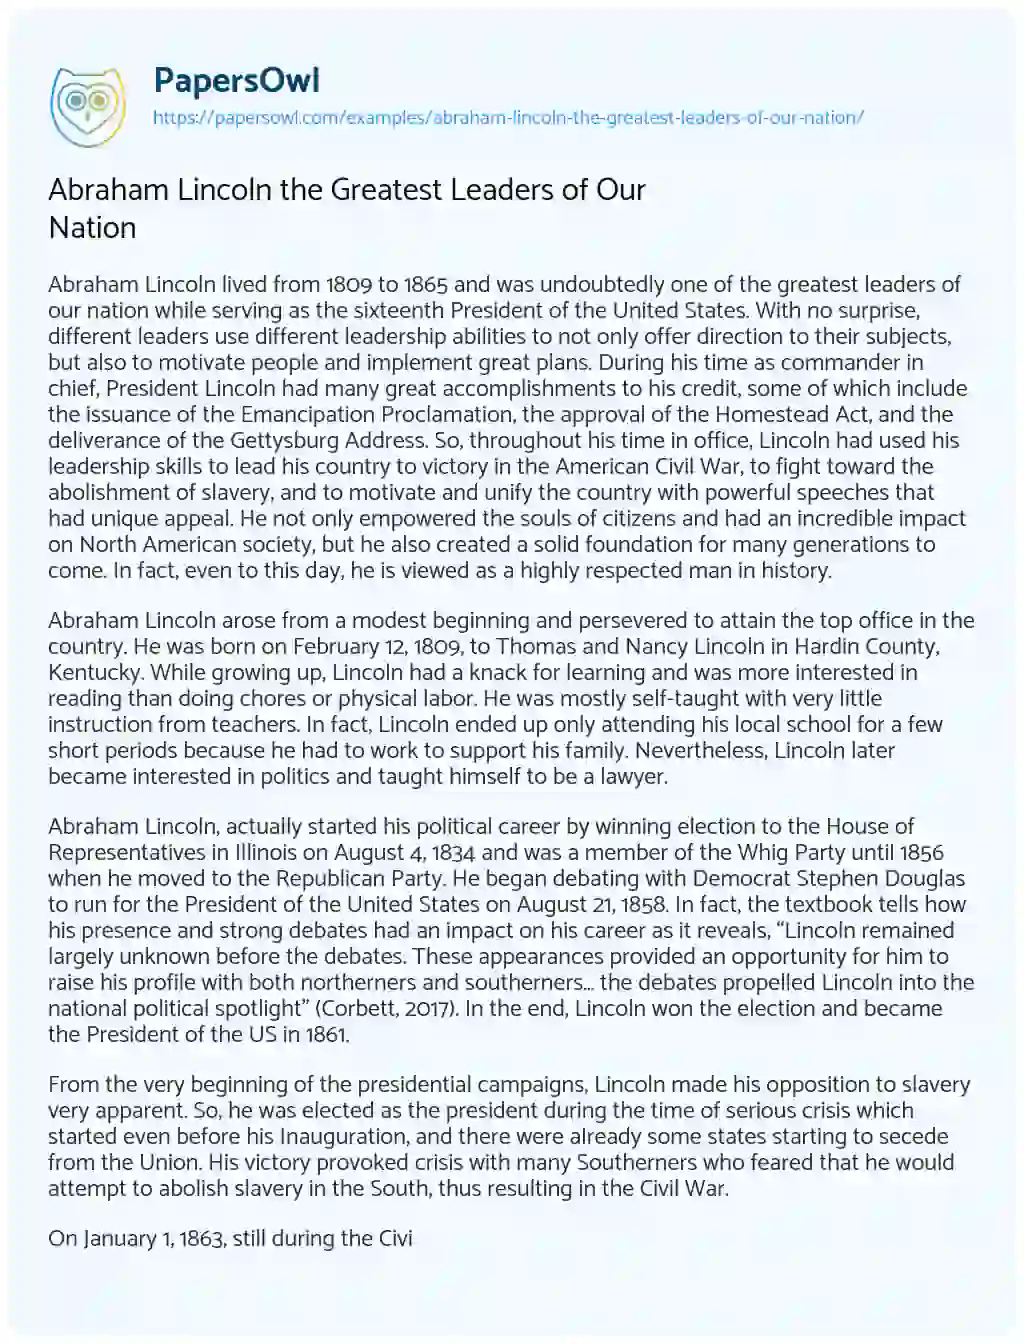 Essay on Abraham Lincoln the Greatest Leaders of our Nation